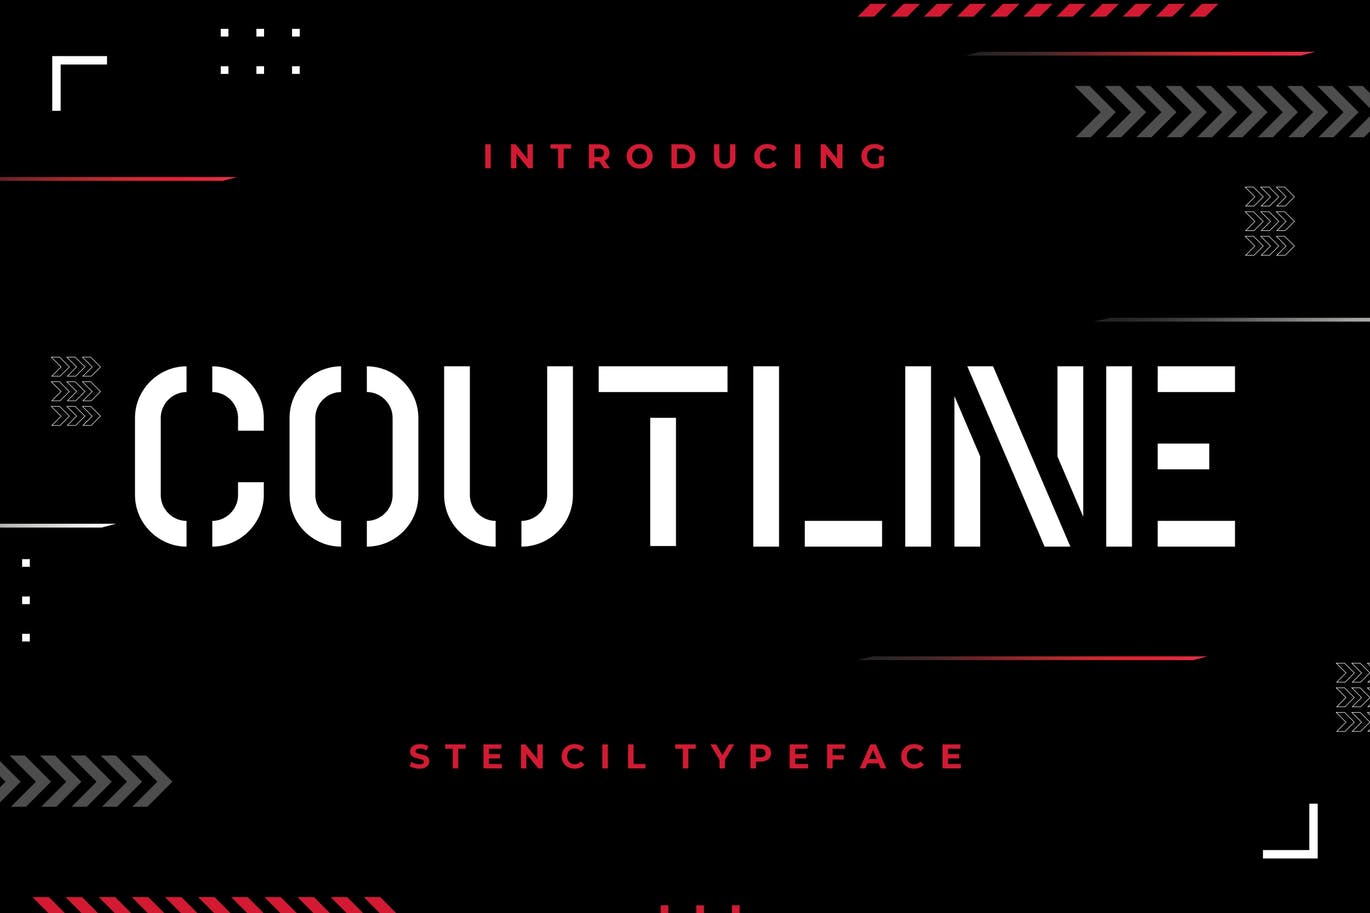 A display stencil typeface